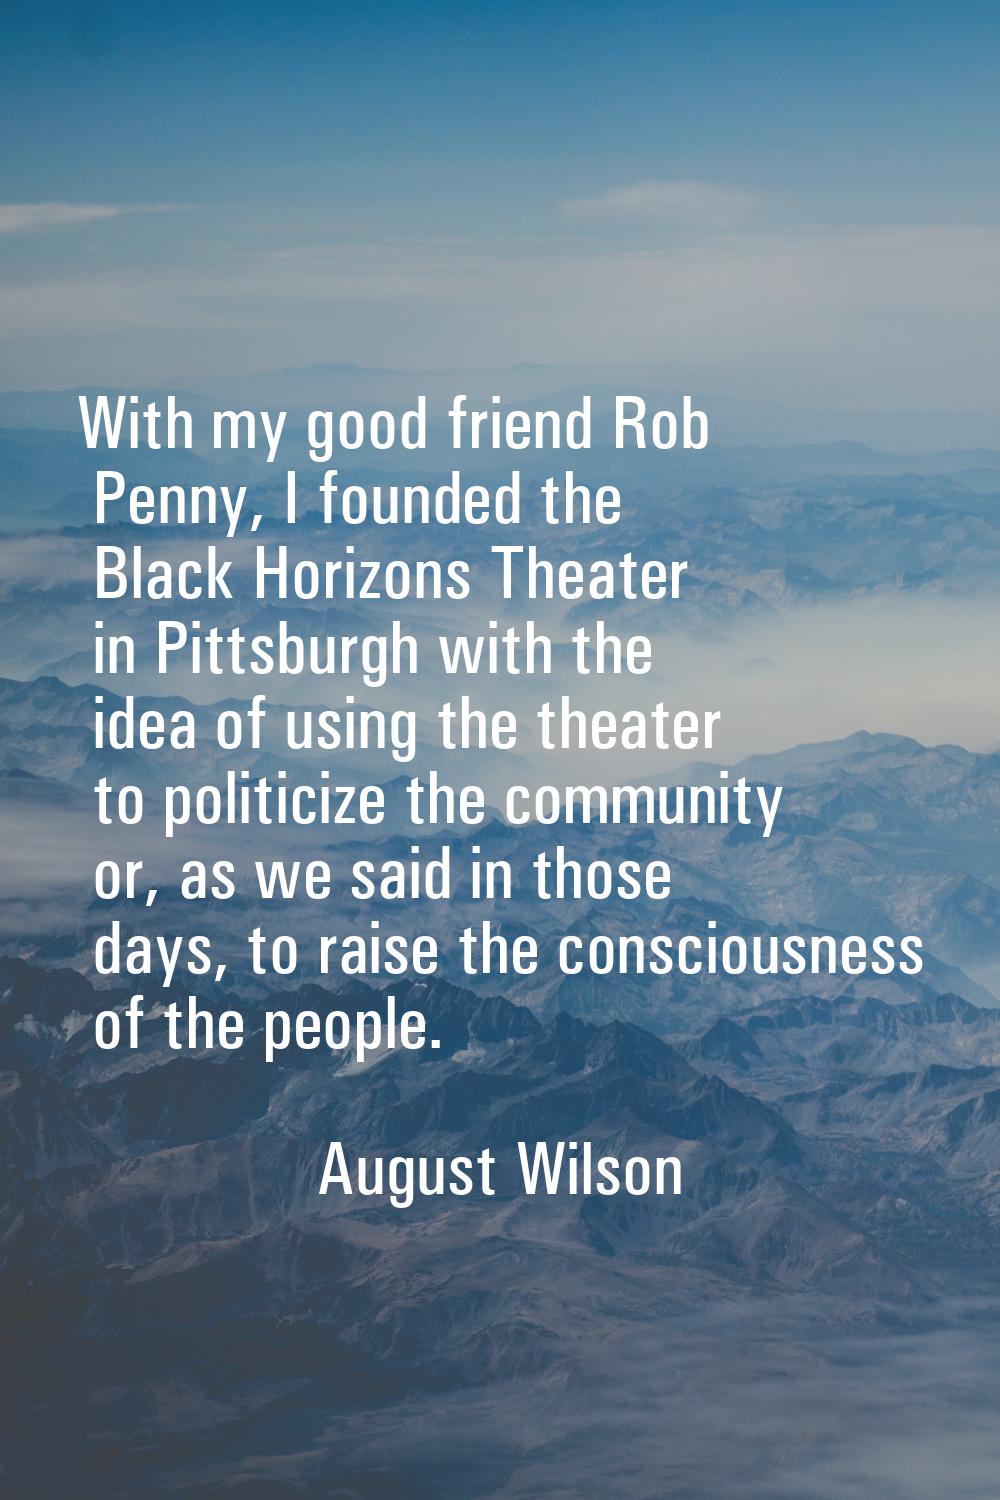 With my good friend Rob Penny, I founded the Black Horizons Theater in Pittsburgh with the idea of 